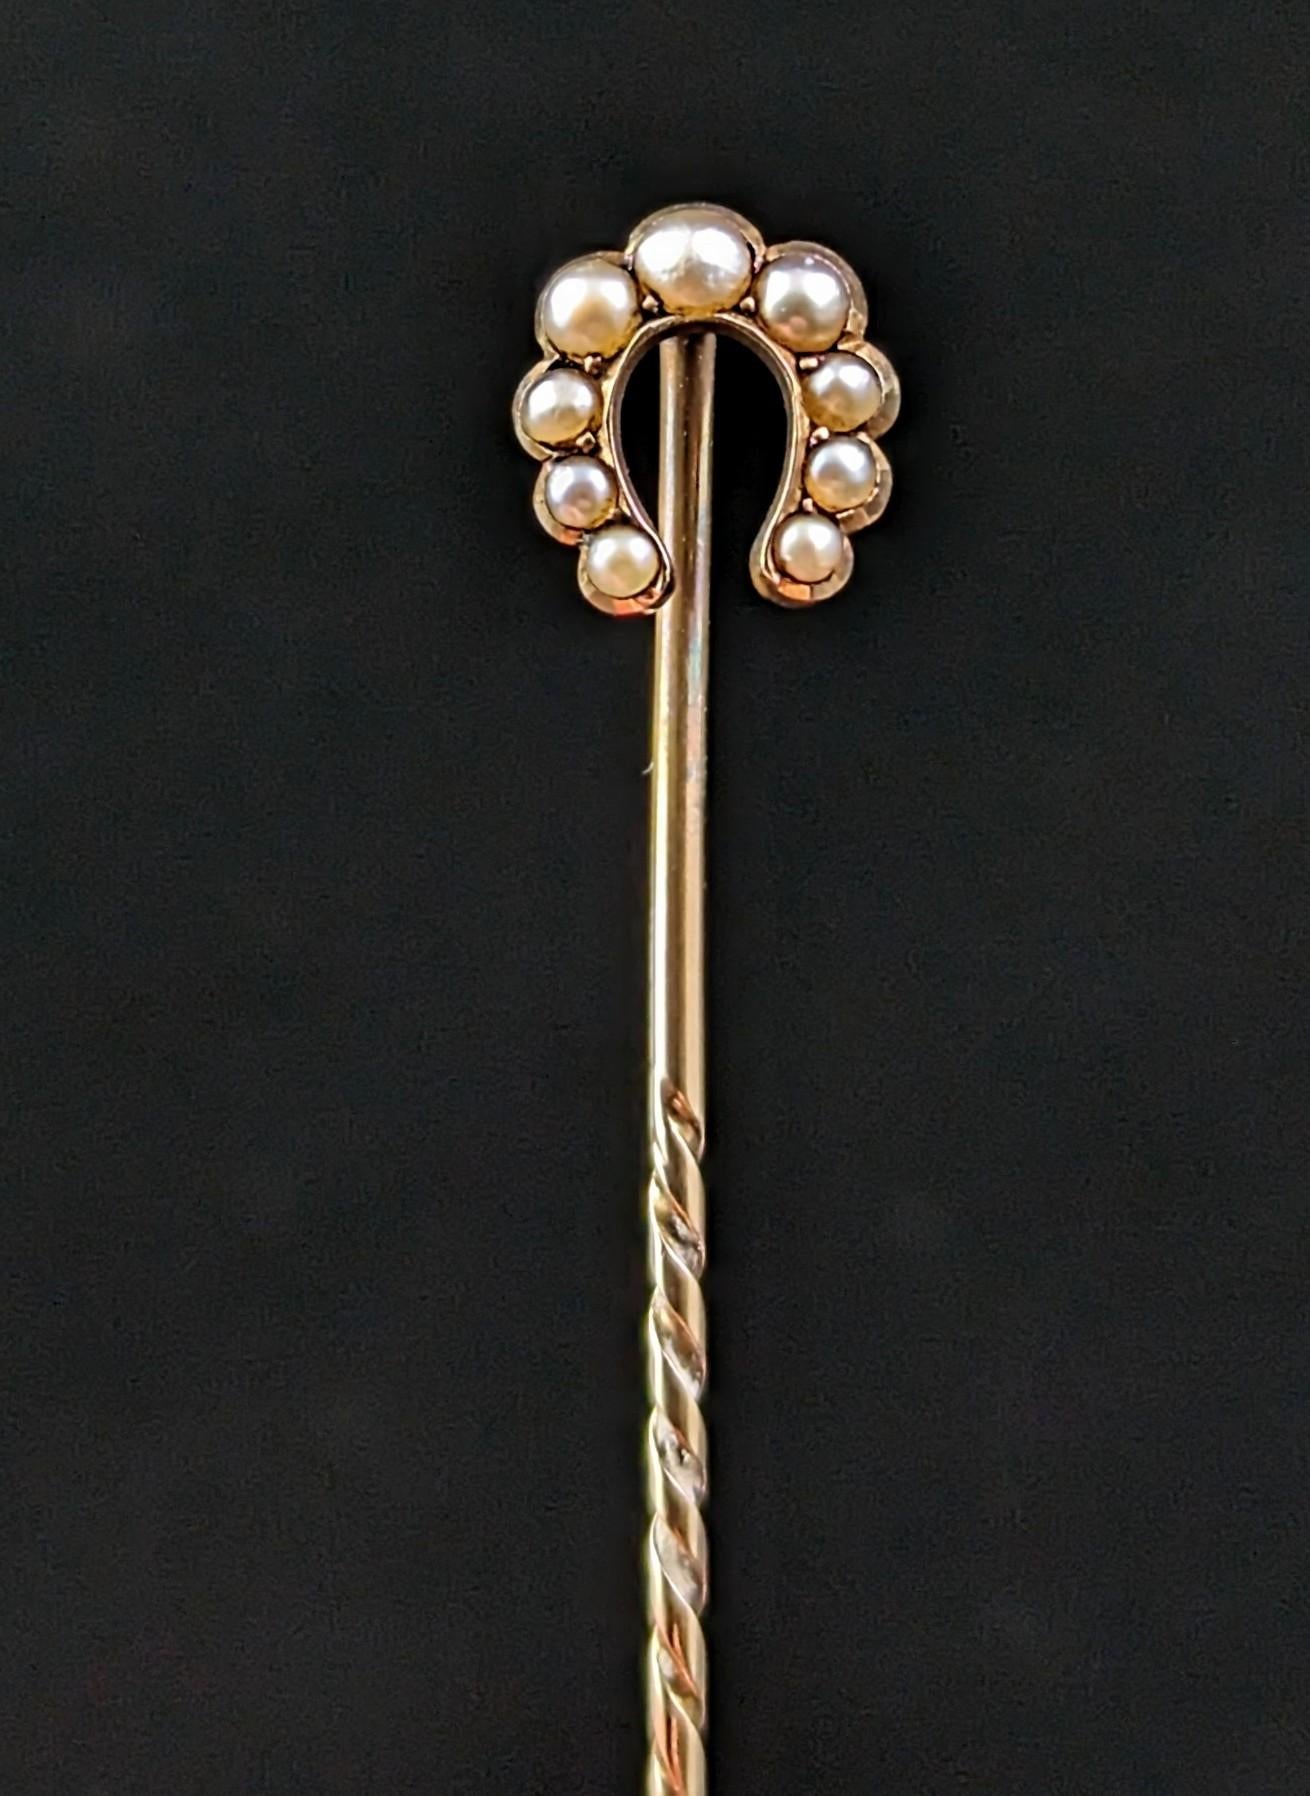 An attractive antique 9ct gold and cultured pearl stick pin.

A 9ct yellow gold stick pin with a horseshoe shaped terminal set with creamy seed pearls, this is a really classic design and will add a little touch of good luck to any outfit!

The